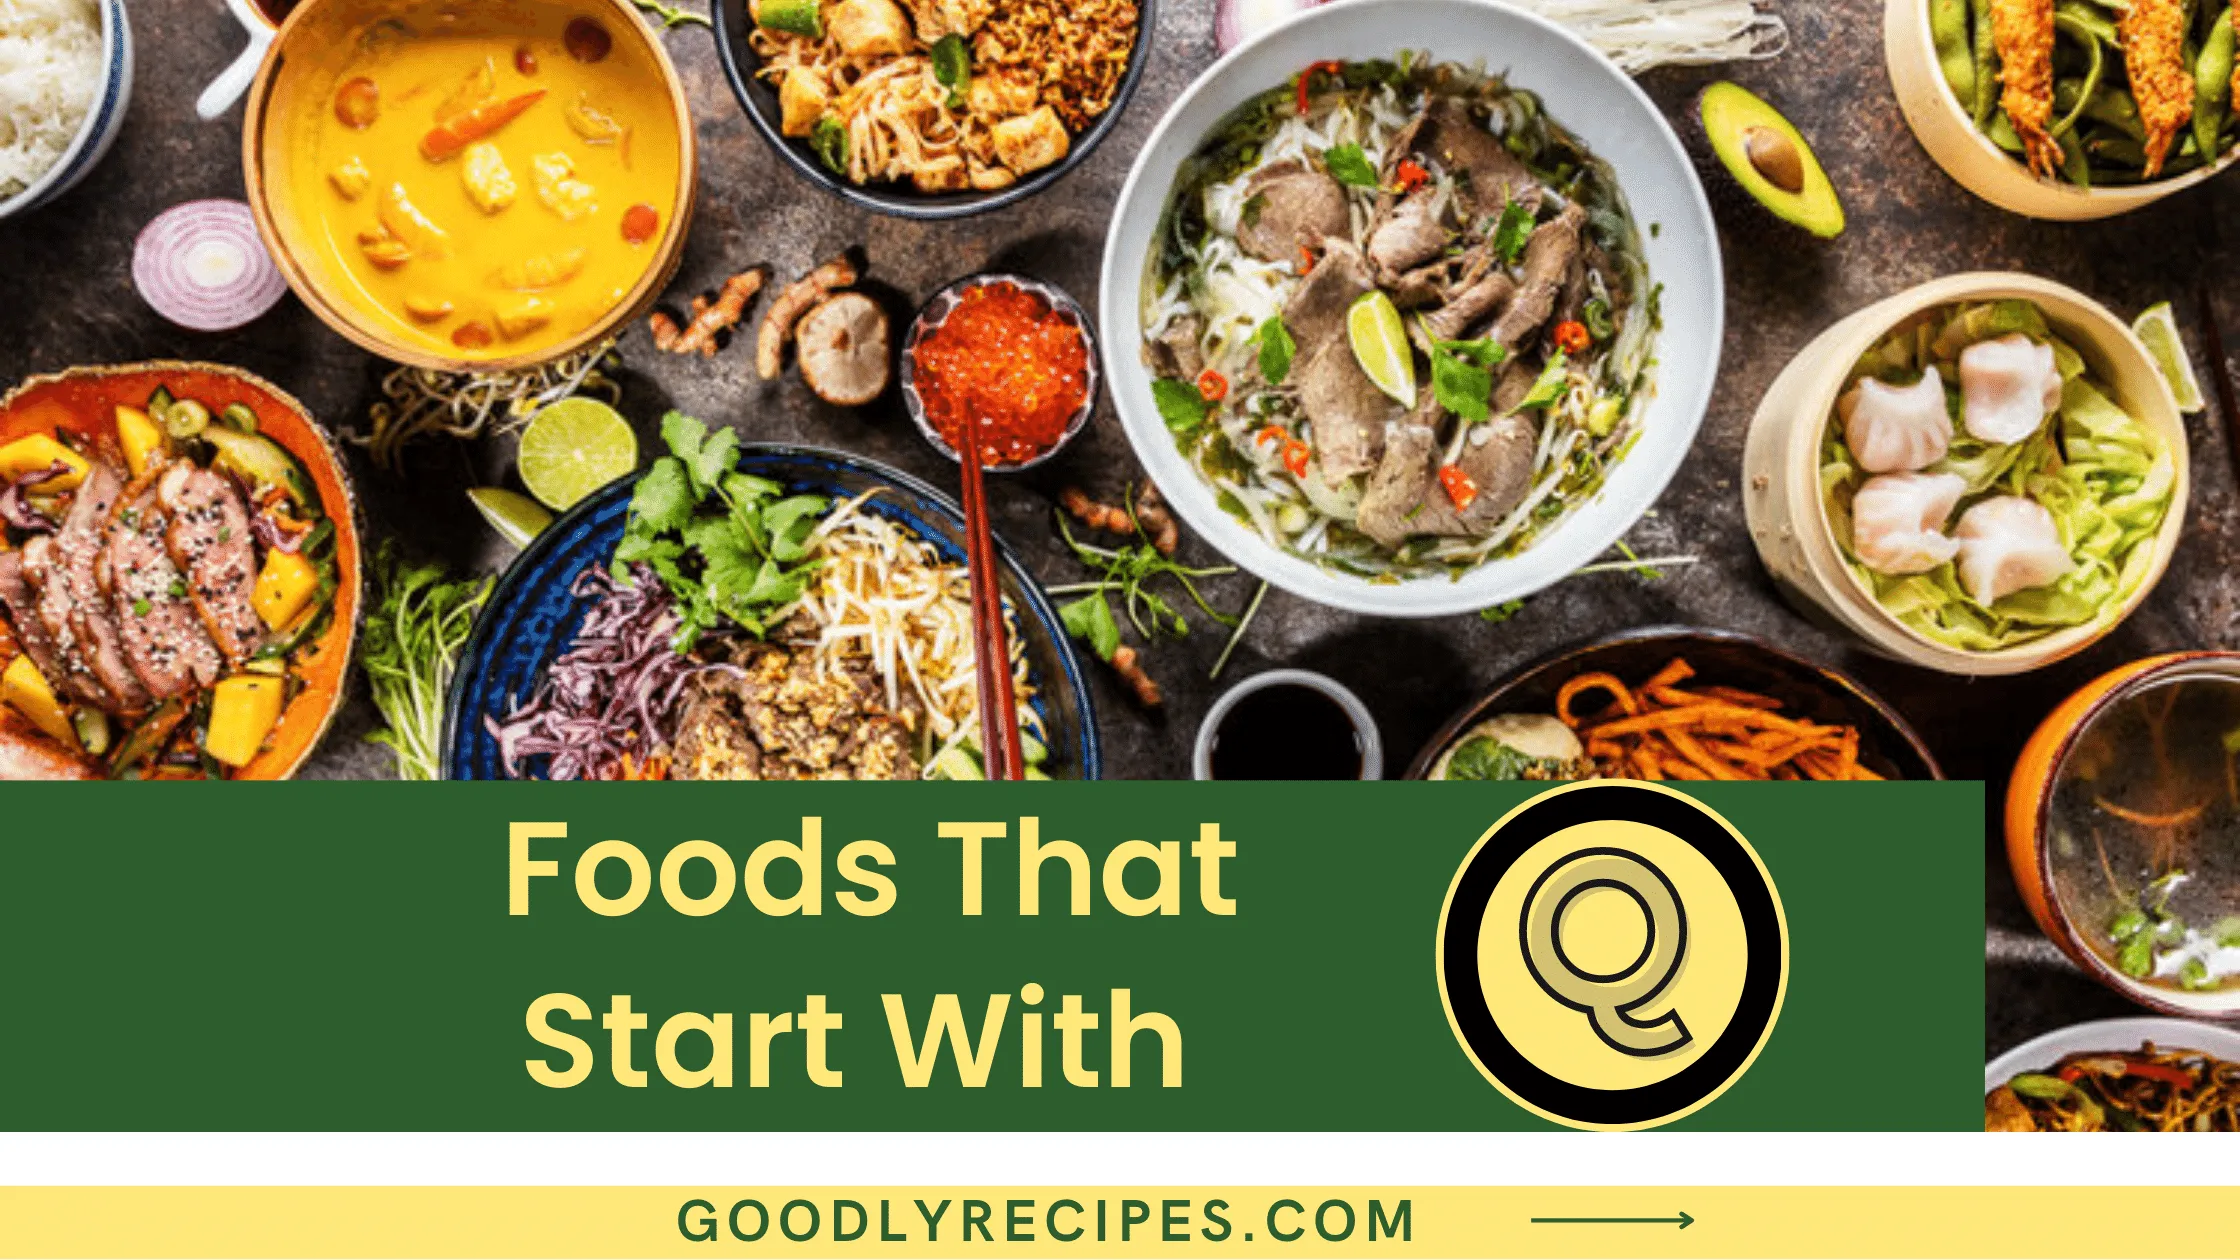 Foods That Start With Q - Special Dishes